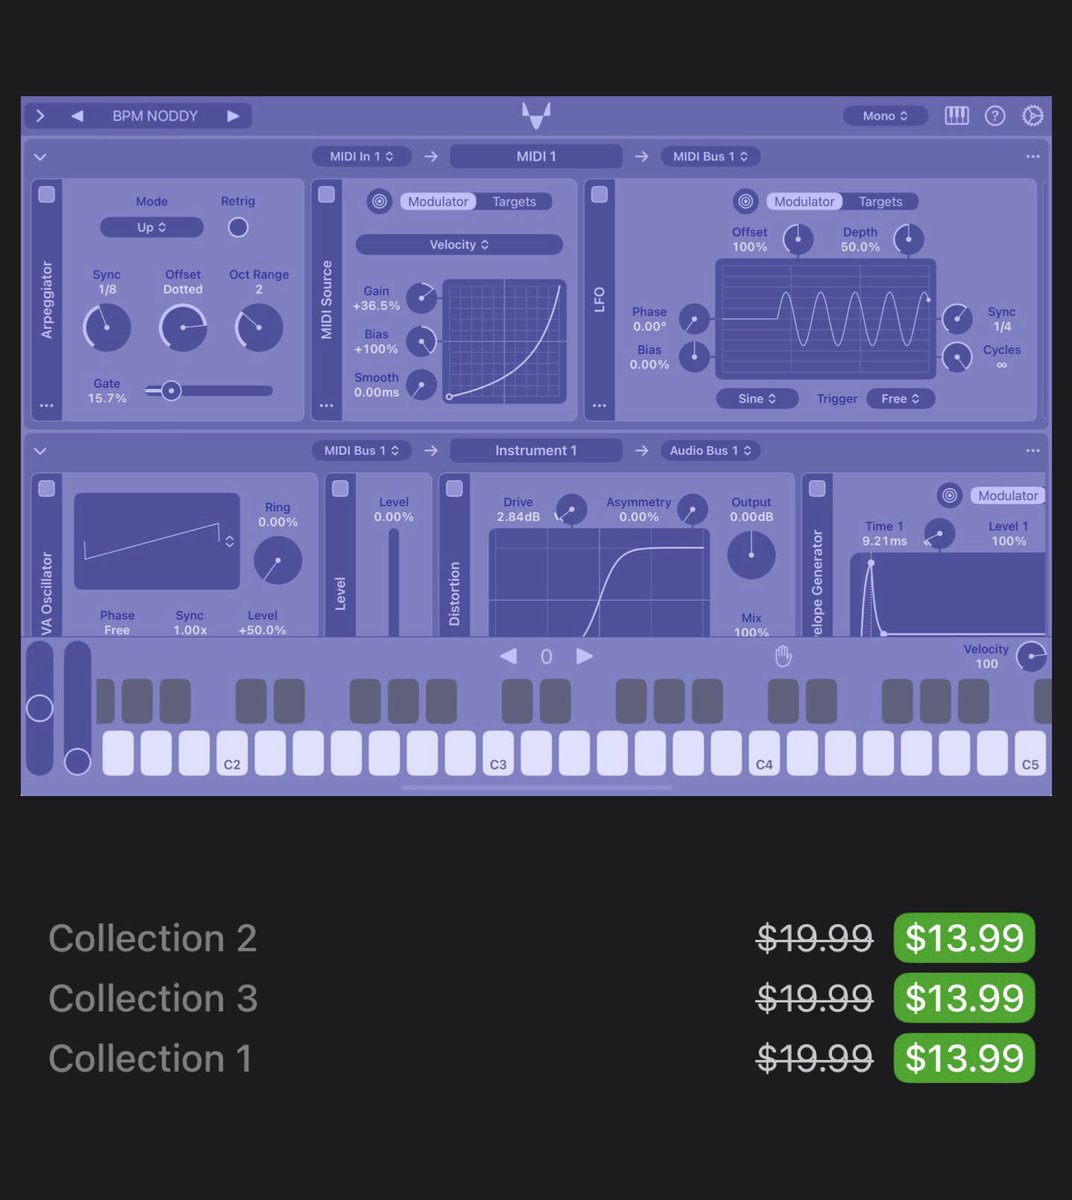 🚨IAP Alert🚨 To celebrate the update to v5.4, @Nikolozi has placed ‘Collections 1-3’ for ‘Mela 5’ on discount ($13.99 each) for a limited time! Expand yours now in the App Store!

apps.apple.com/us/app/mela-5-…